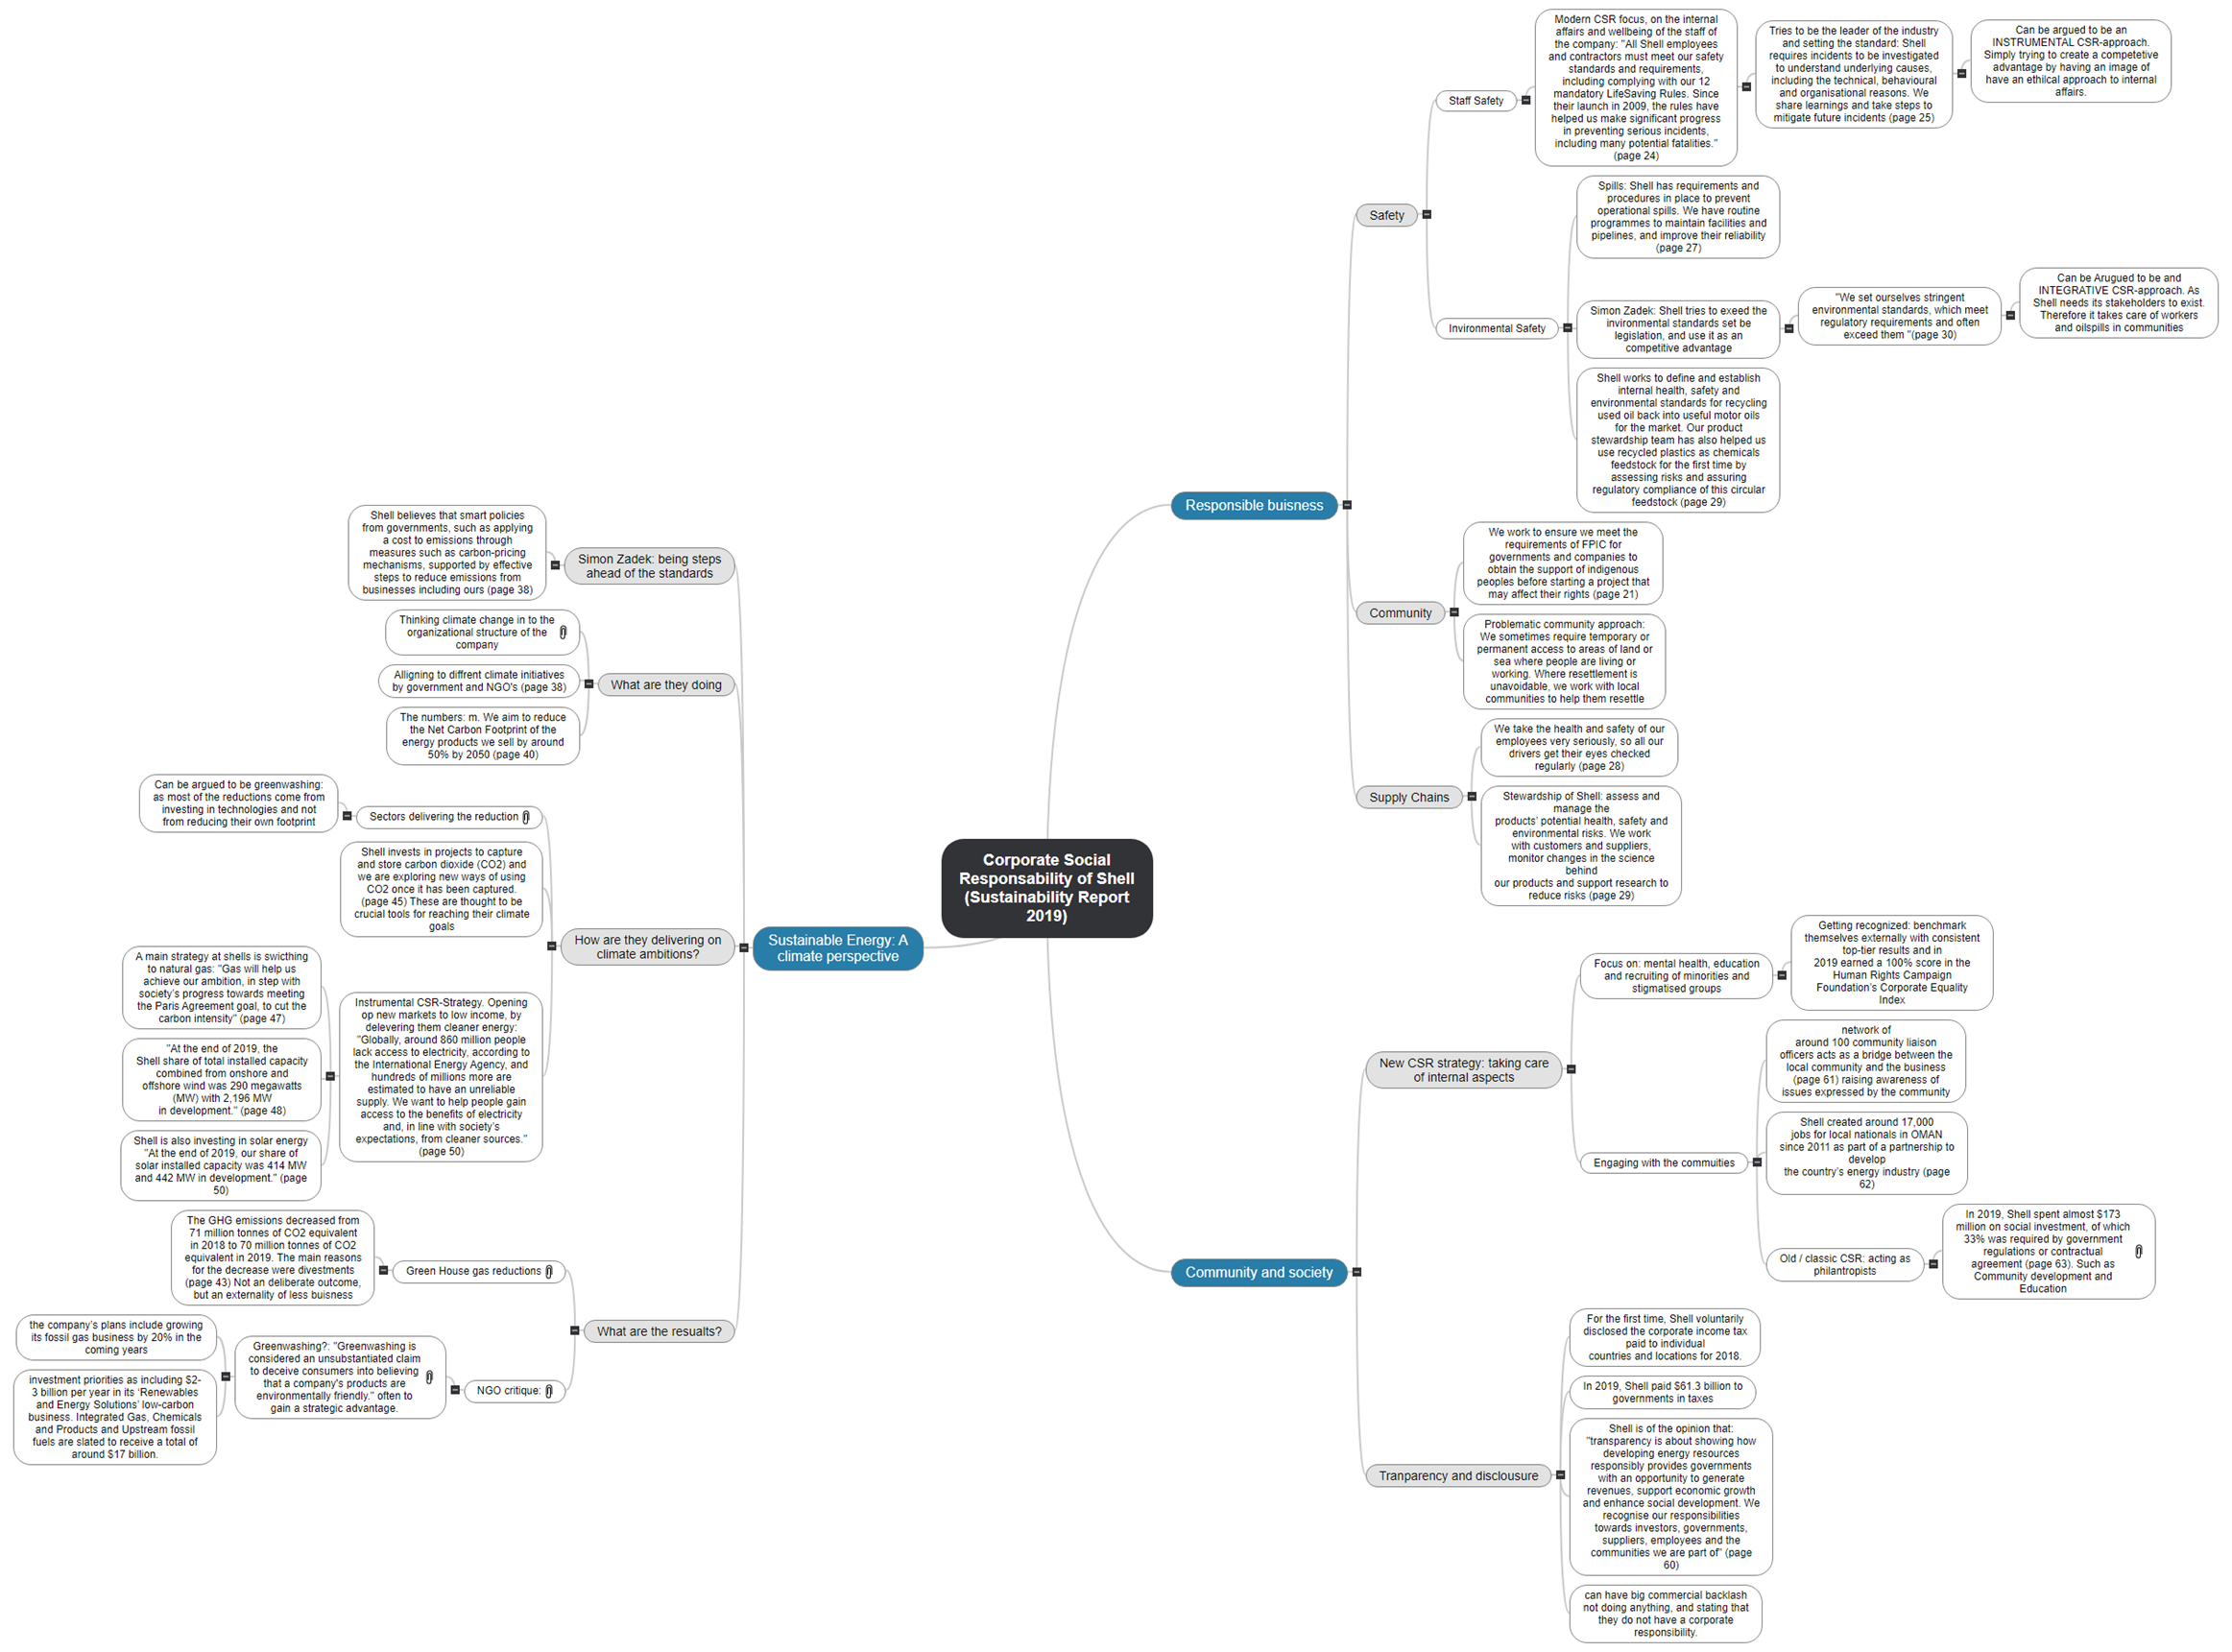 Corporate Social Responsability of Shell (Sustainability Report 2019) Mind Map